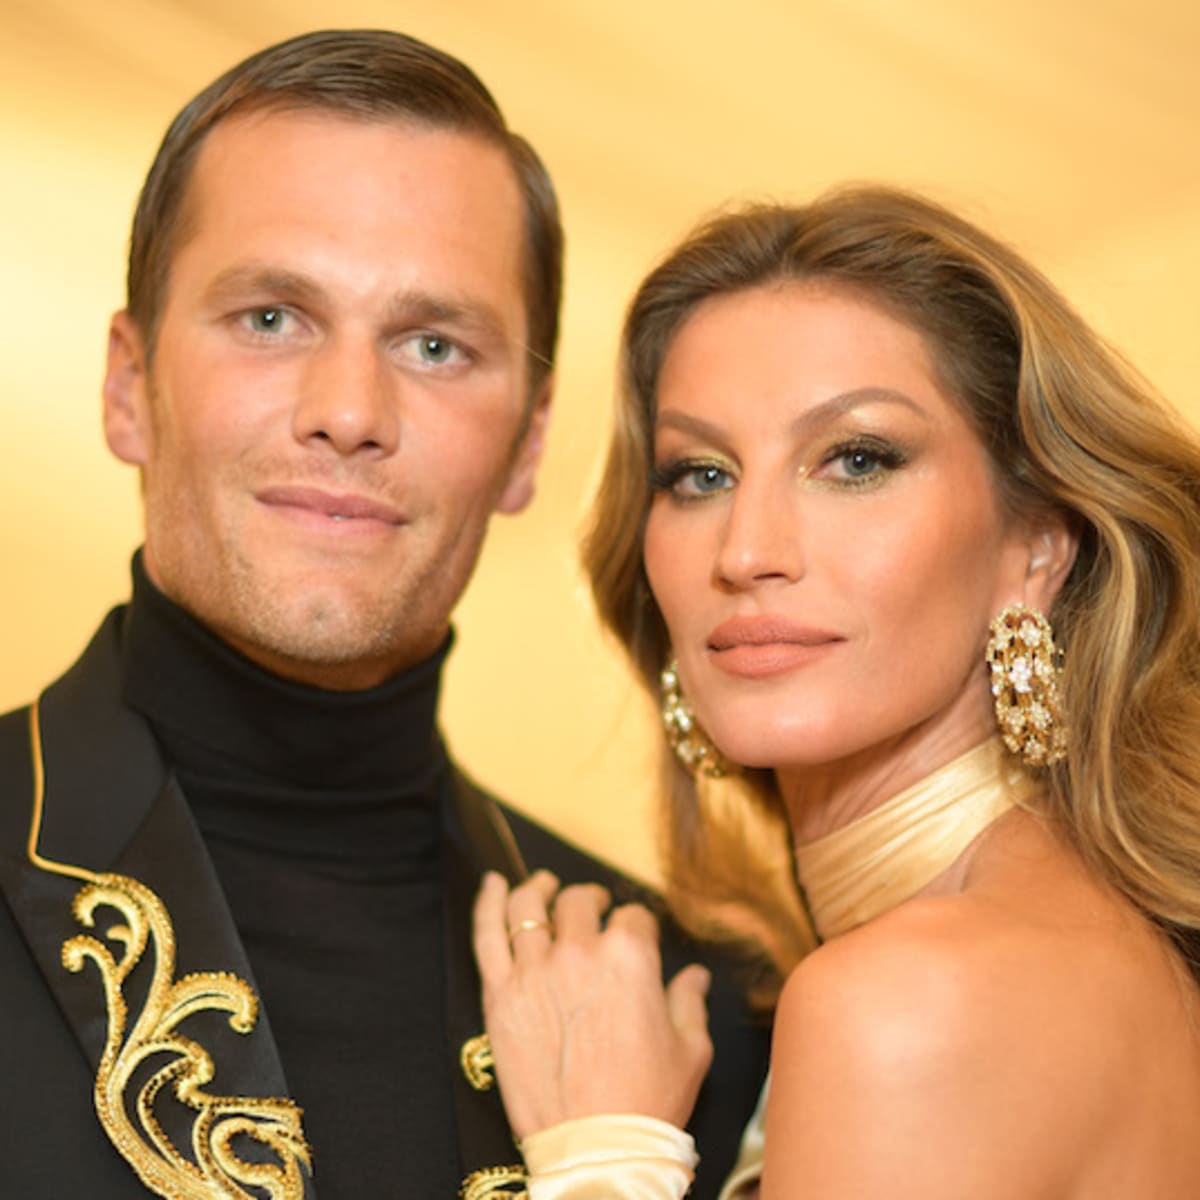 Tom Brady's Family: 5 Fast Facts You Need to Know